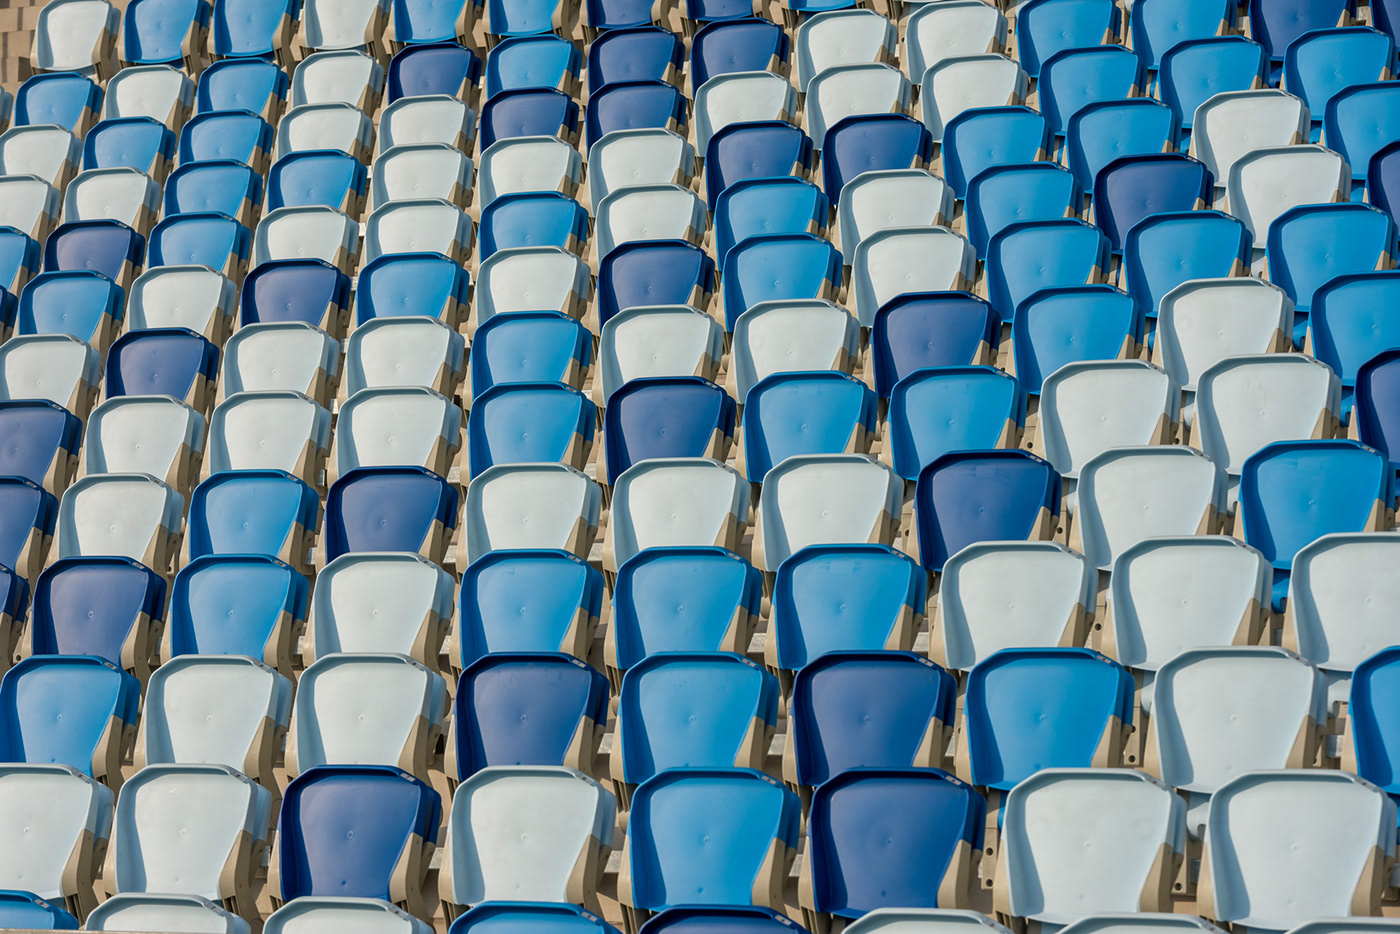 architecturalphotography architecture details football Photography  seats soccer stadiums